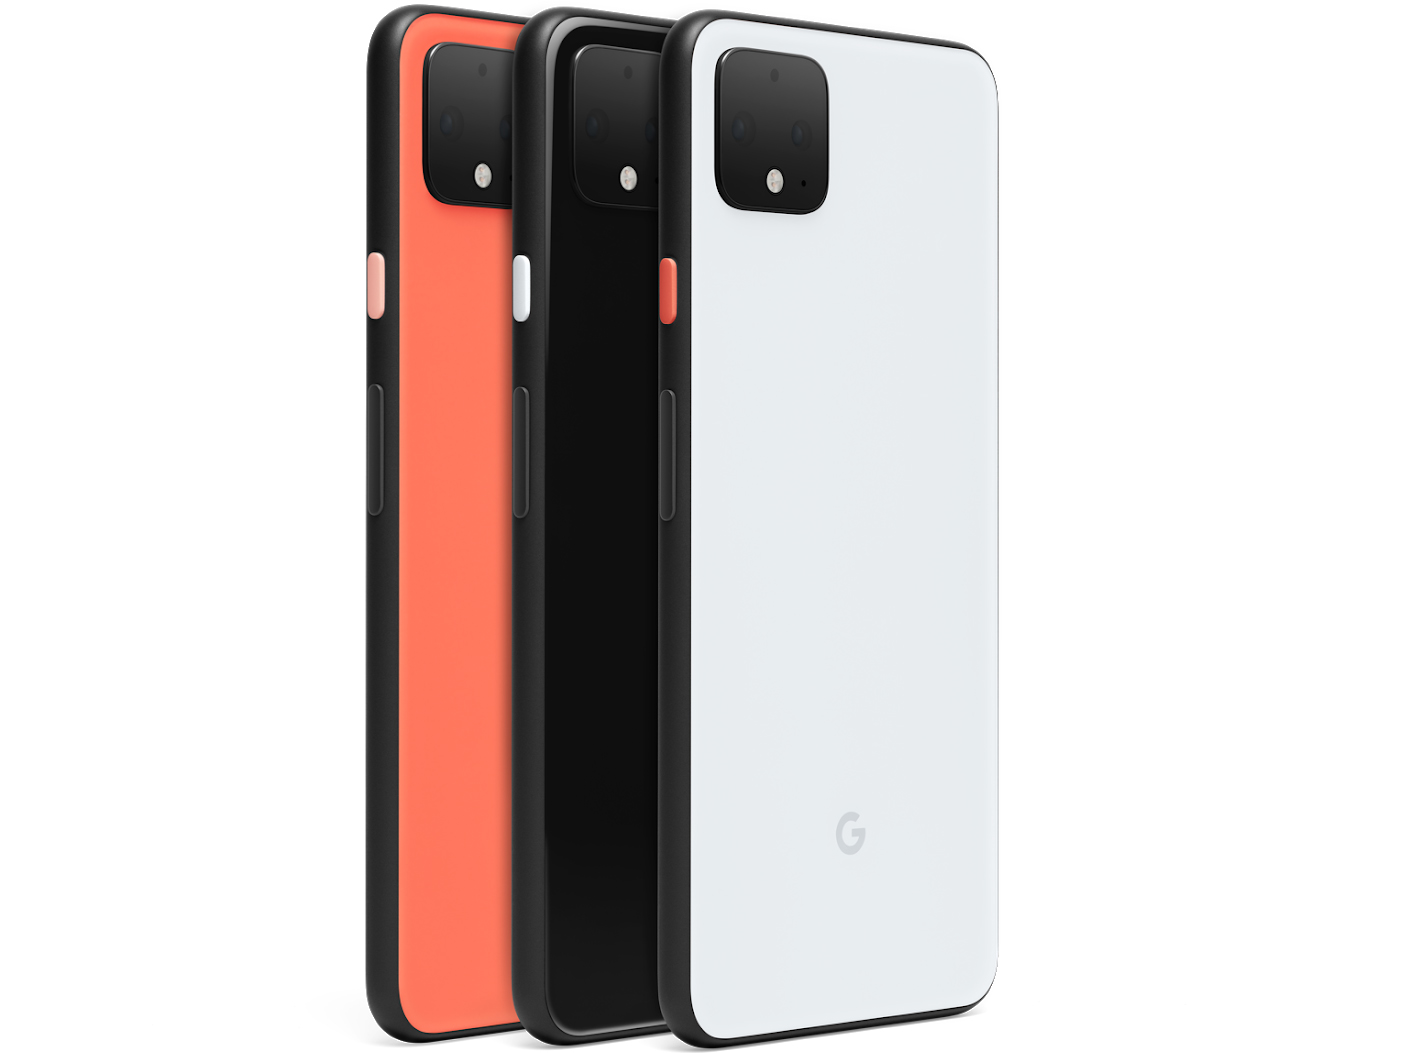 Replacing The Battery On Google Pixel 4: Step-by-Step Guide